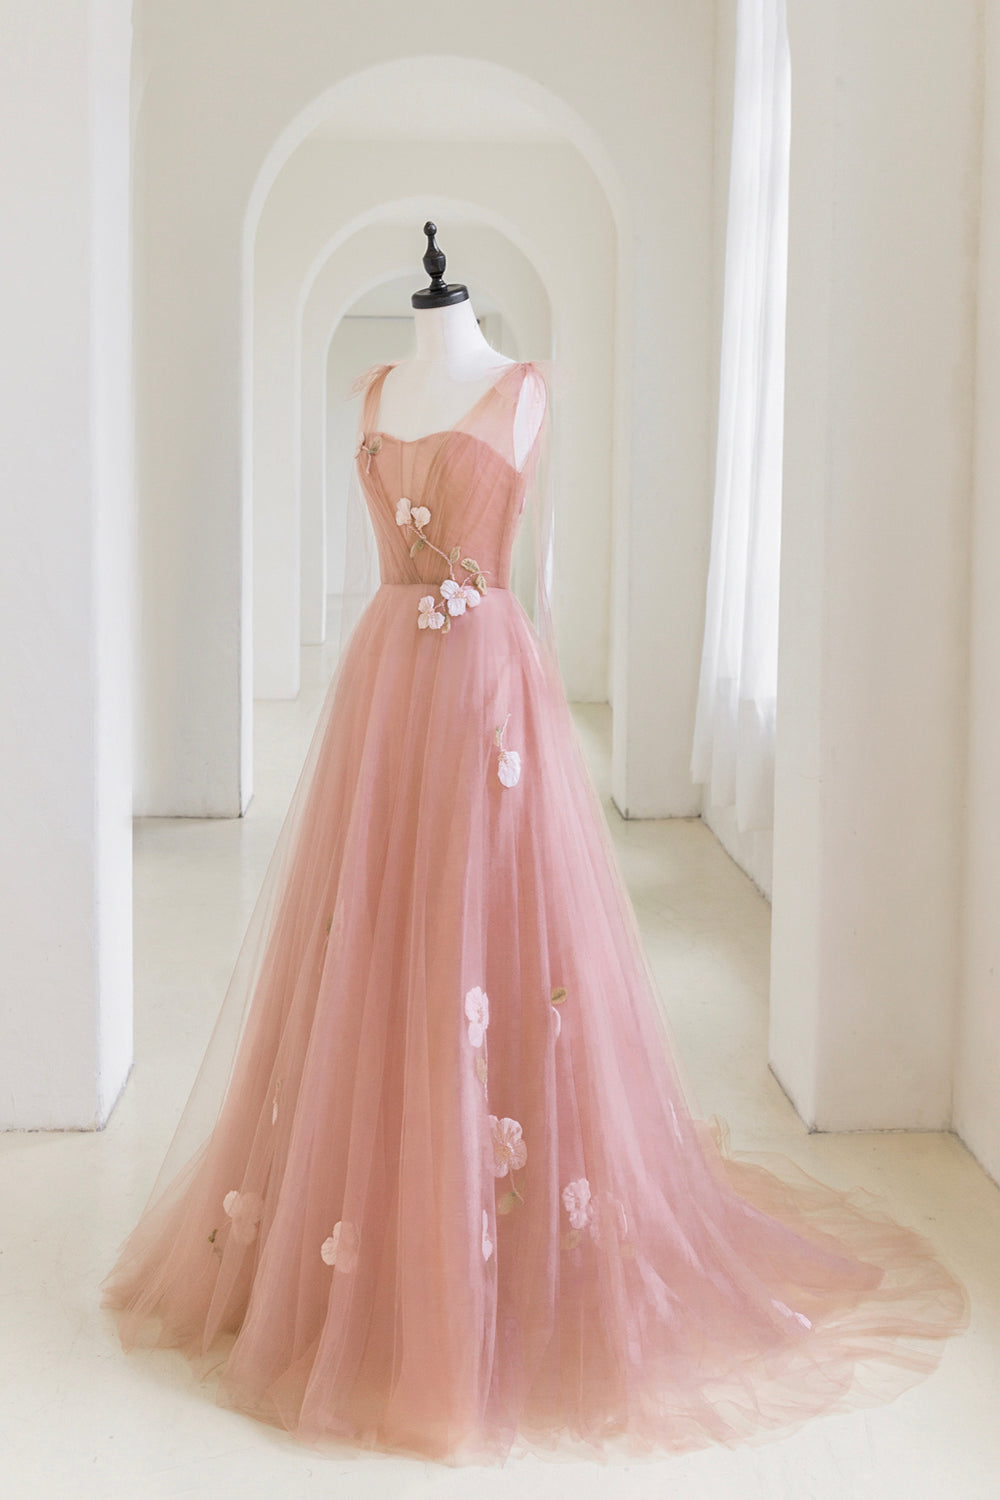 Prom Dresses Brands, Pink Tulle Long A-Line Prom Dress, Lovely Pink Evening Graduation Dress